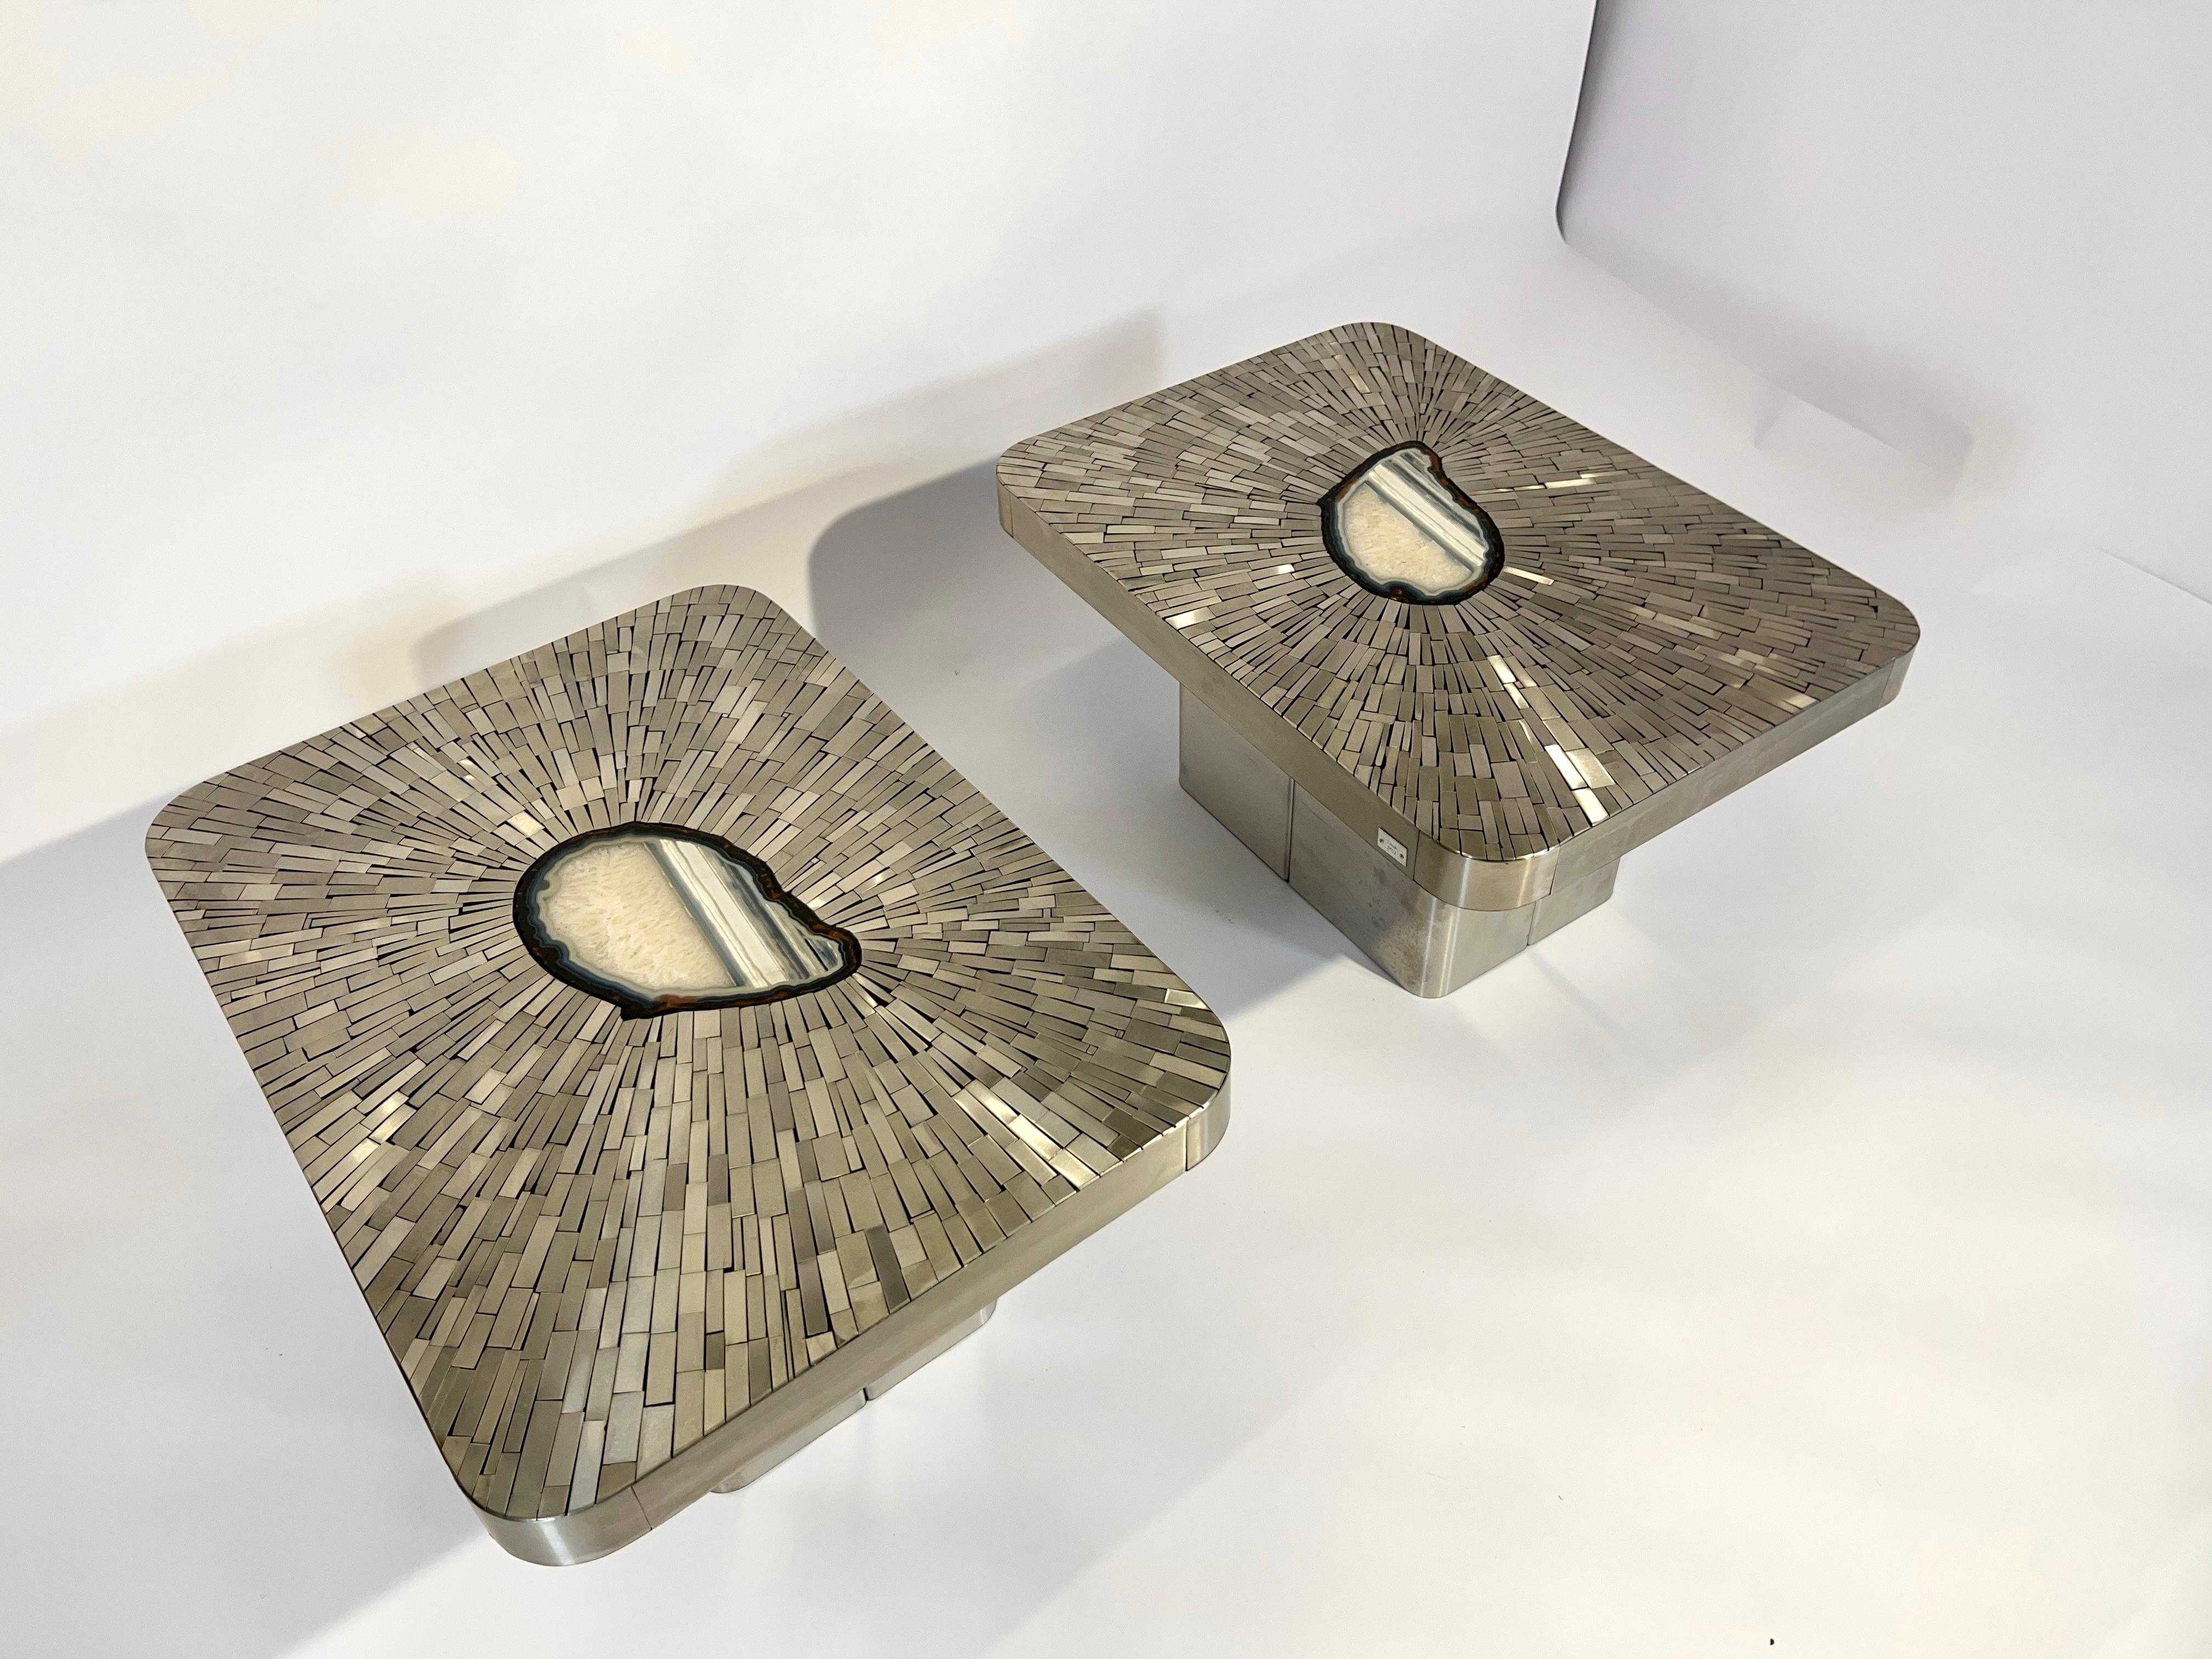 Pair of Side Table mosaic stainless steel and agate by Stan Usel For Sale 3